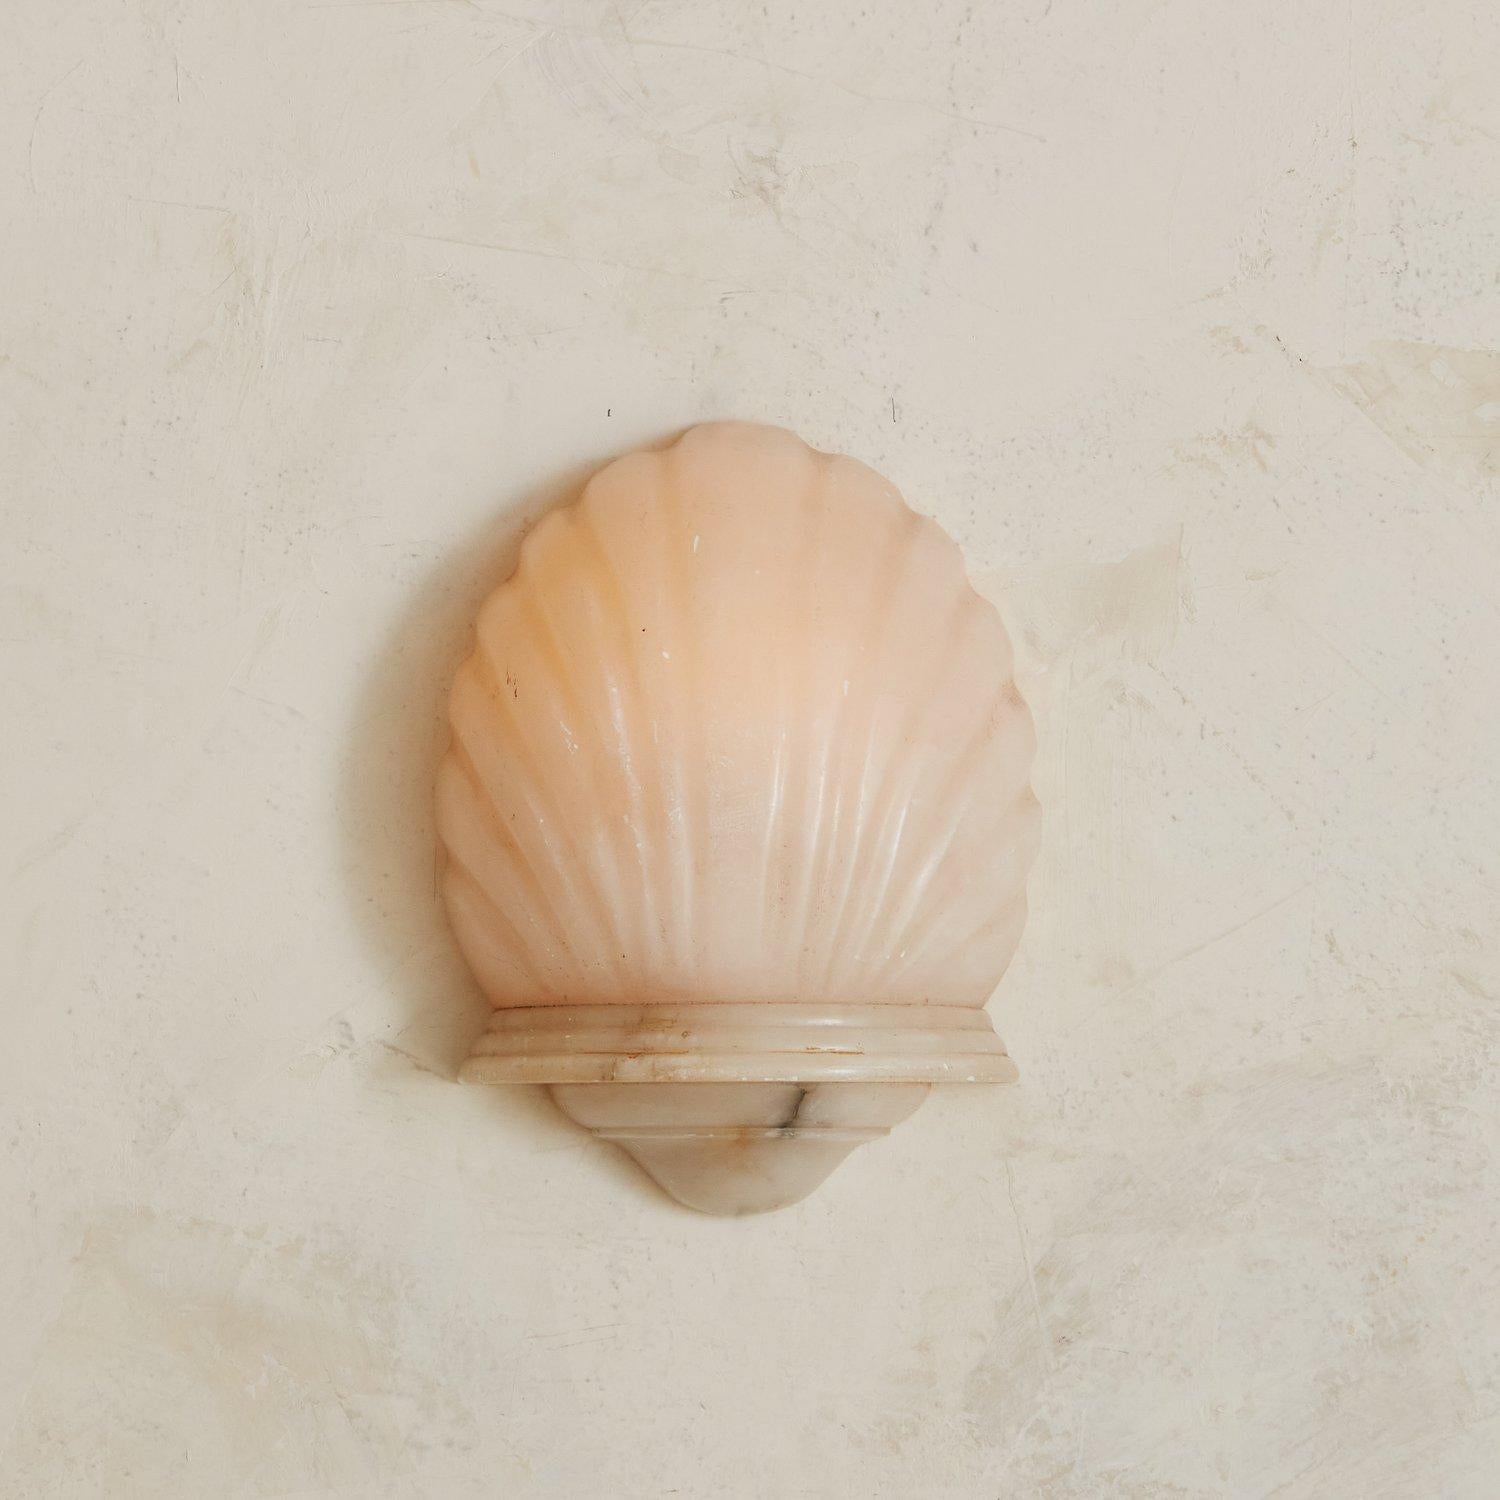 A gorgeous shell sconce carved from alabaster. When lit, this sconce emits a warm light that highlights the natural veining of the stone. ‘1922’ carved on the inner base. Sourced in France.